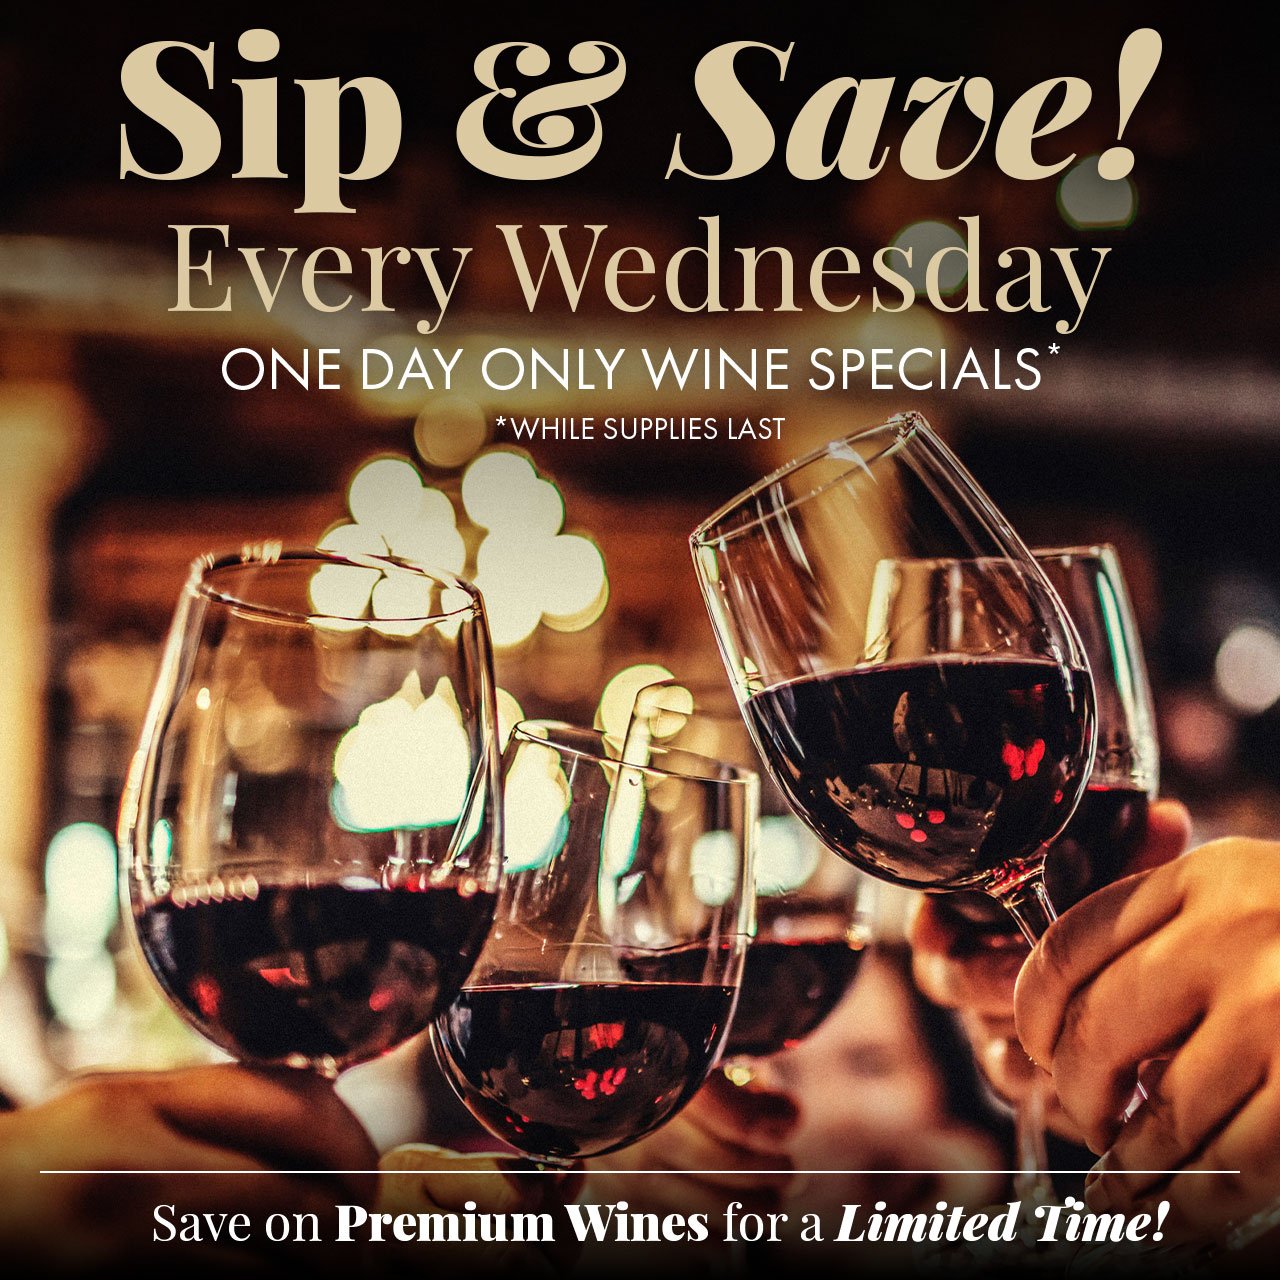 Sip & Save Every Wednesday. One Day Only Wine Specials while supplies last.